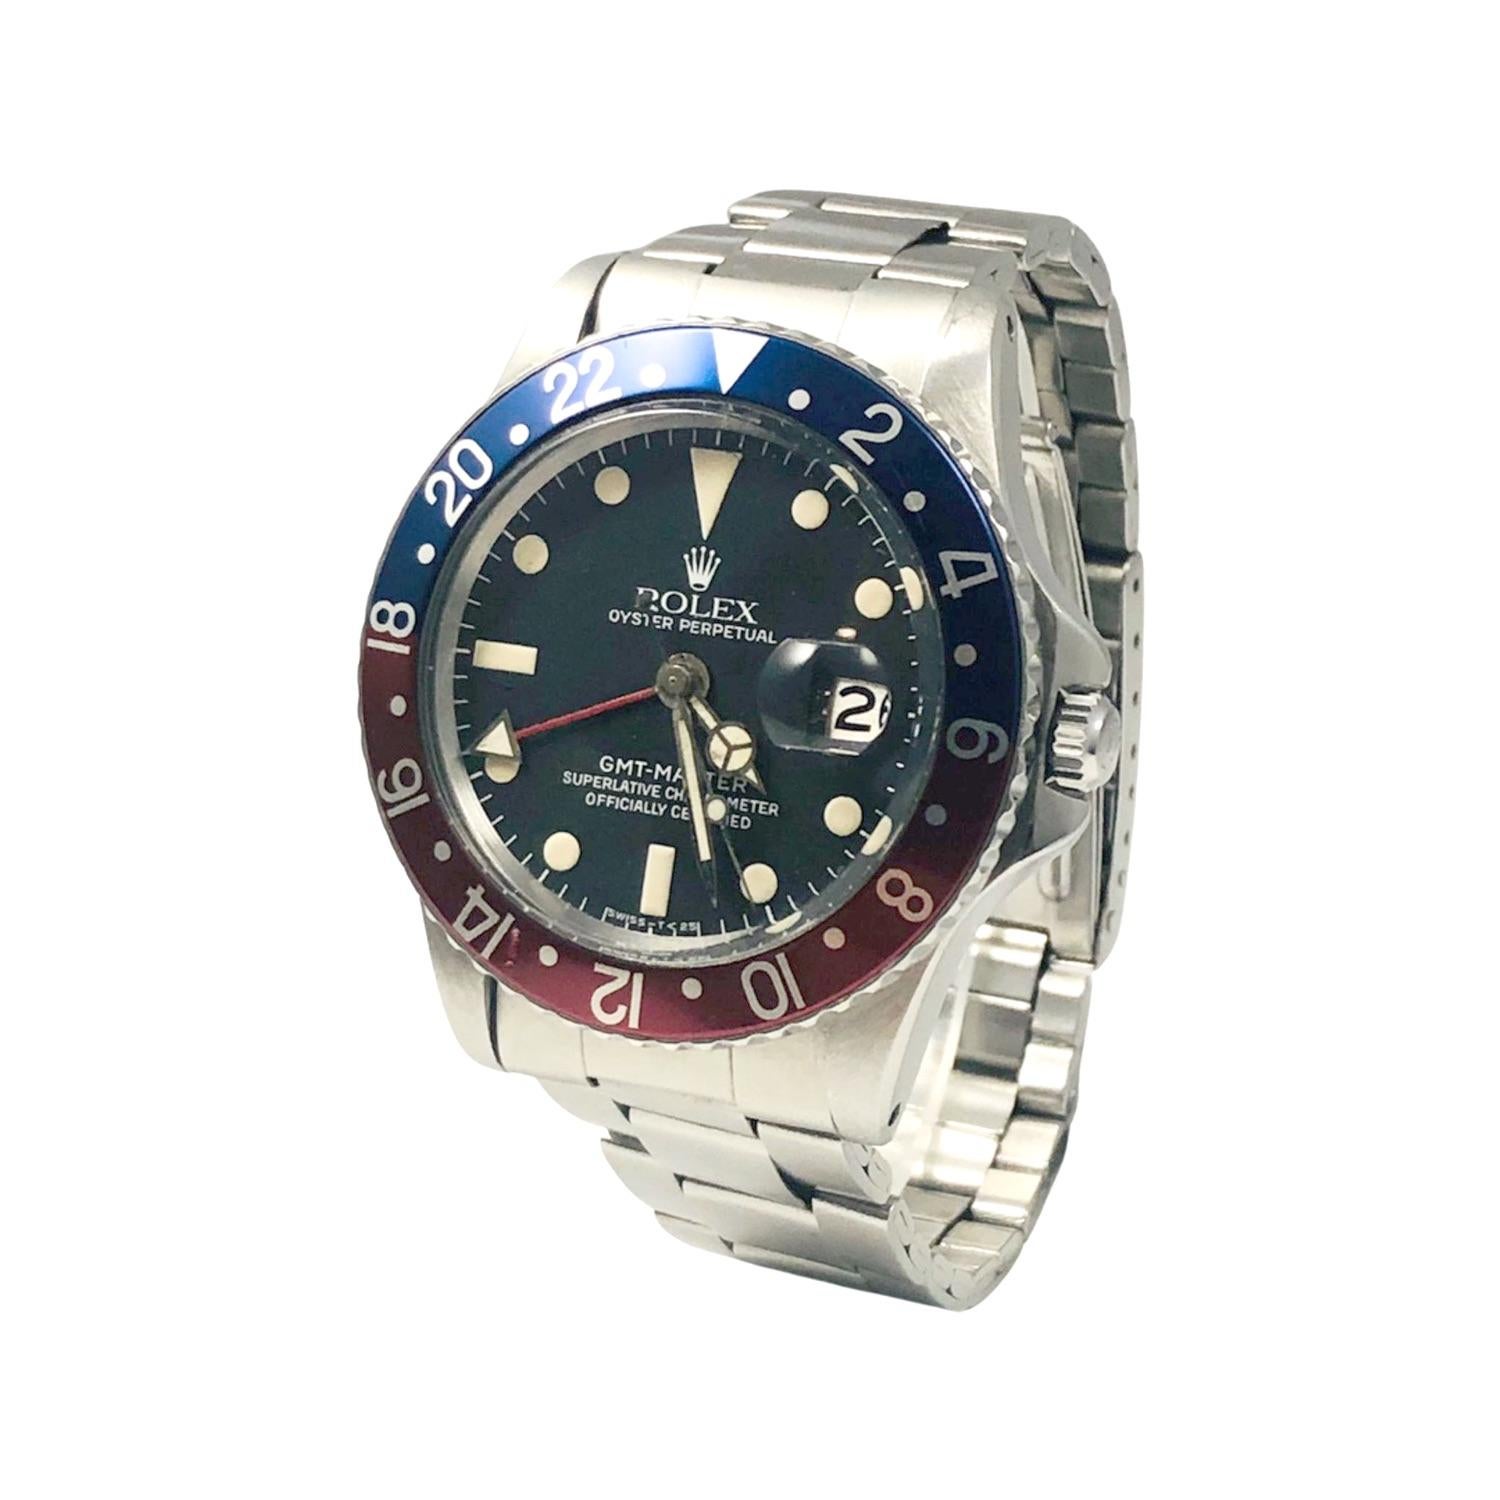 Rolex GMT-Master Ref. 1675 'Pepsi' Stainless Steel Red & Blue Bezel Watch In Good Condition For Sale In Miami, FL